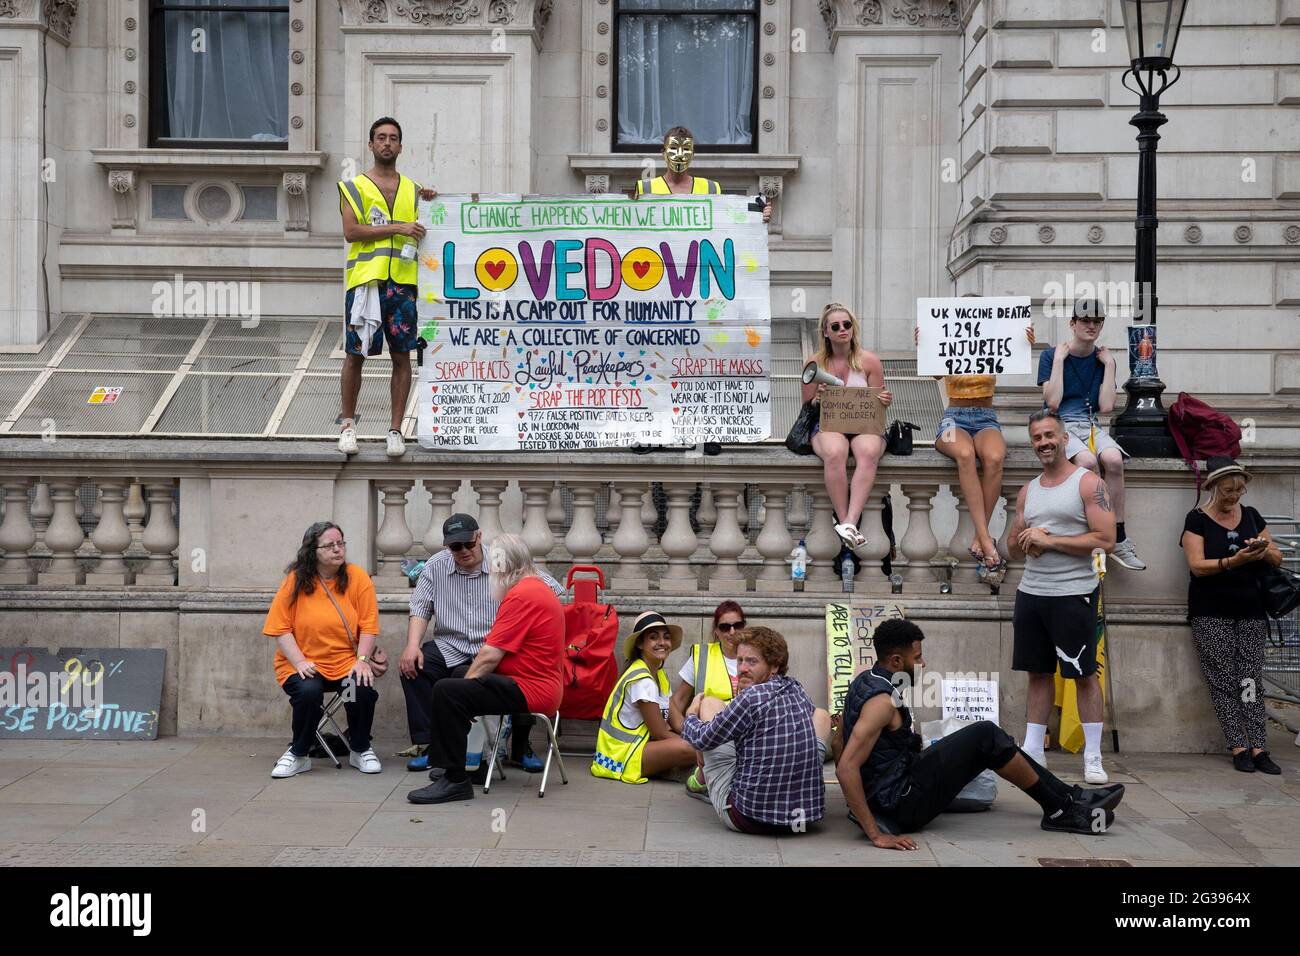 London, UK. 14th June 2021. Anti-vaxx protesters gather outside Downing Street. Yuen Ching Ng/Alamy Live News Stock Photo